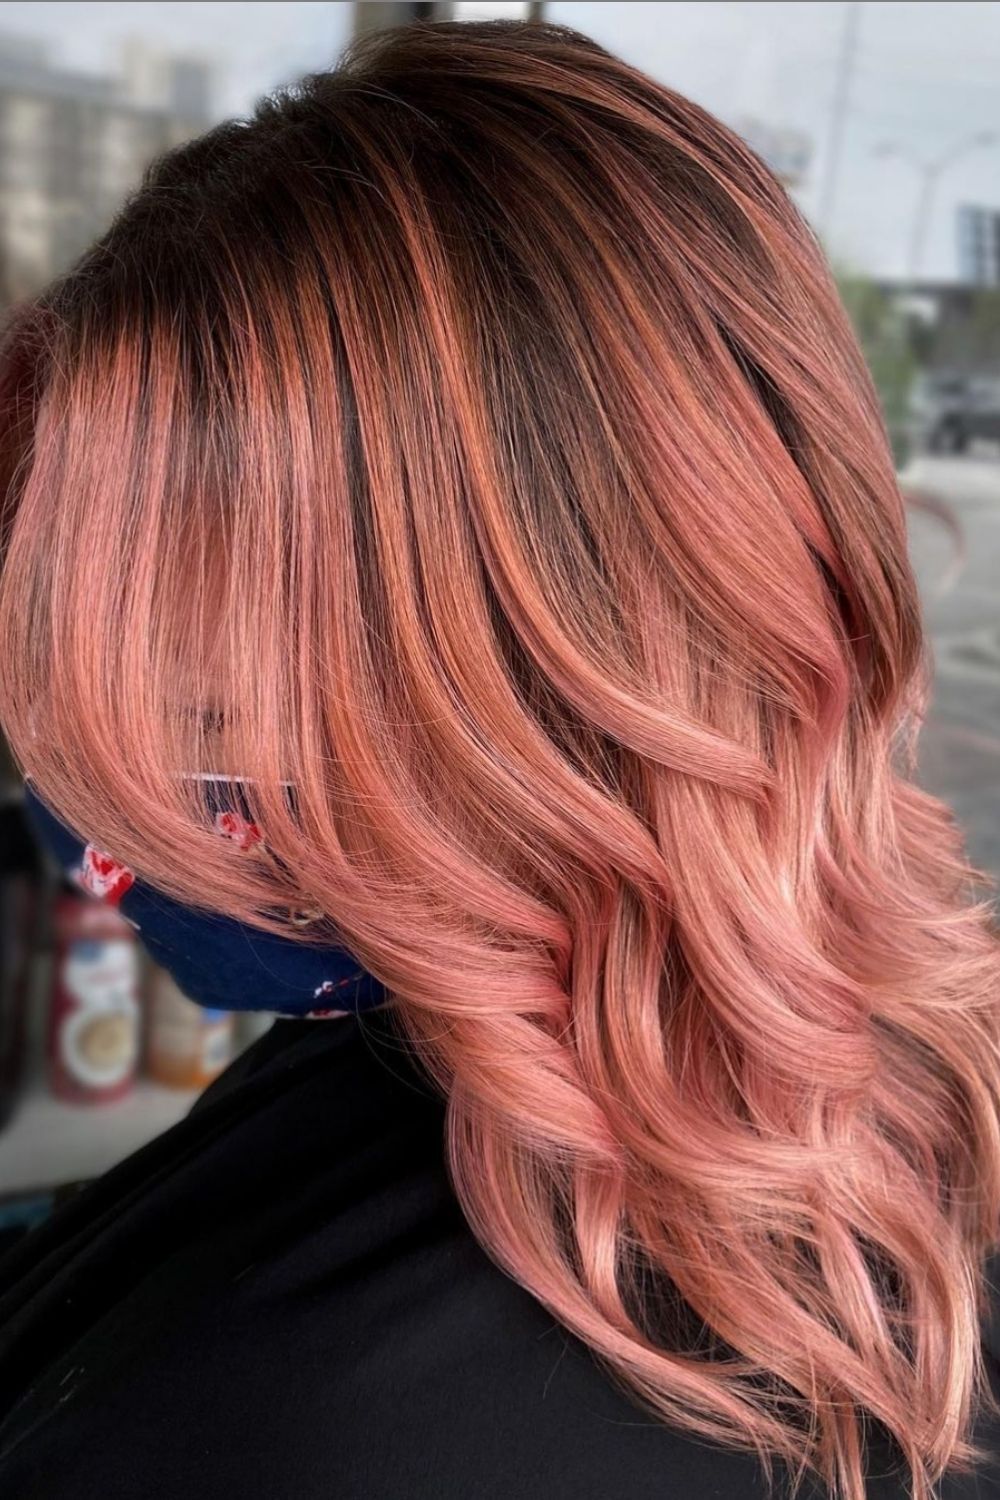 44 Best Fall Hair Colors And Hair Dye Ideas For 2021 Page 3 Of 7